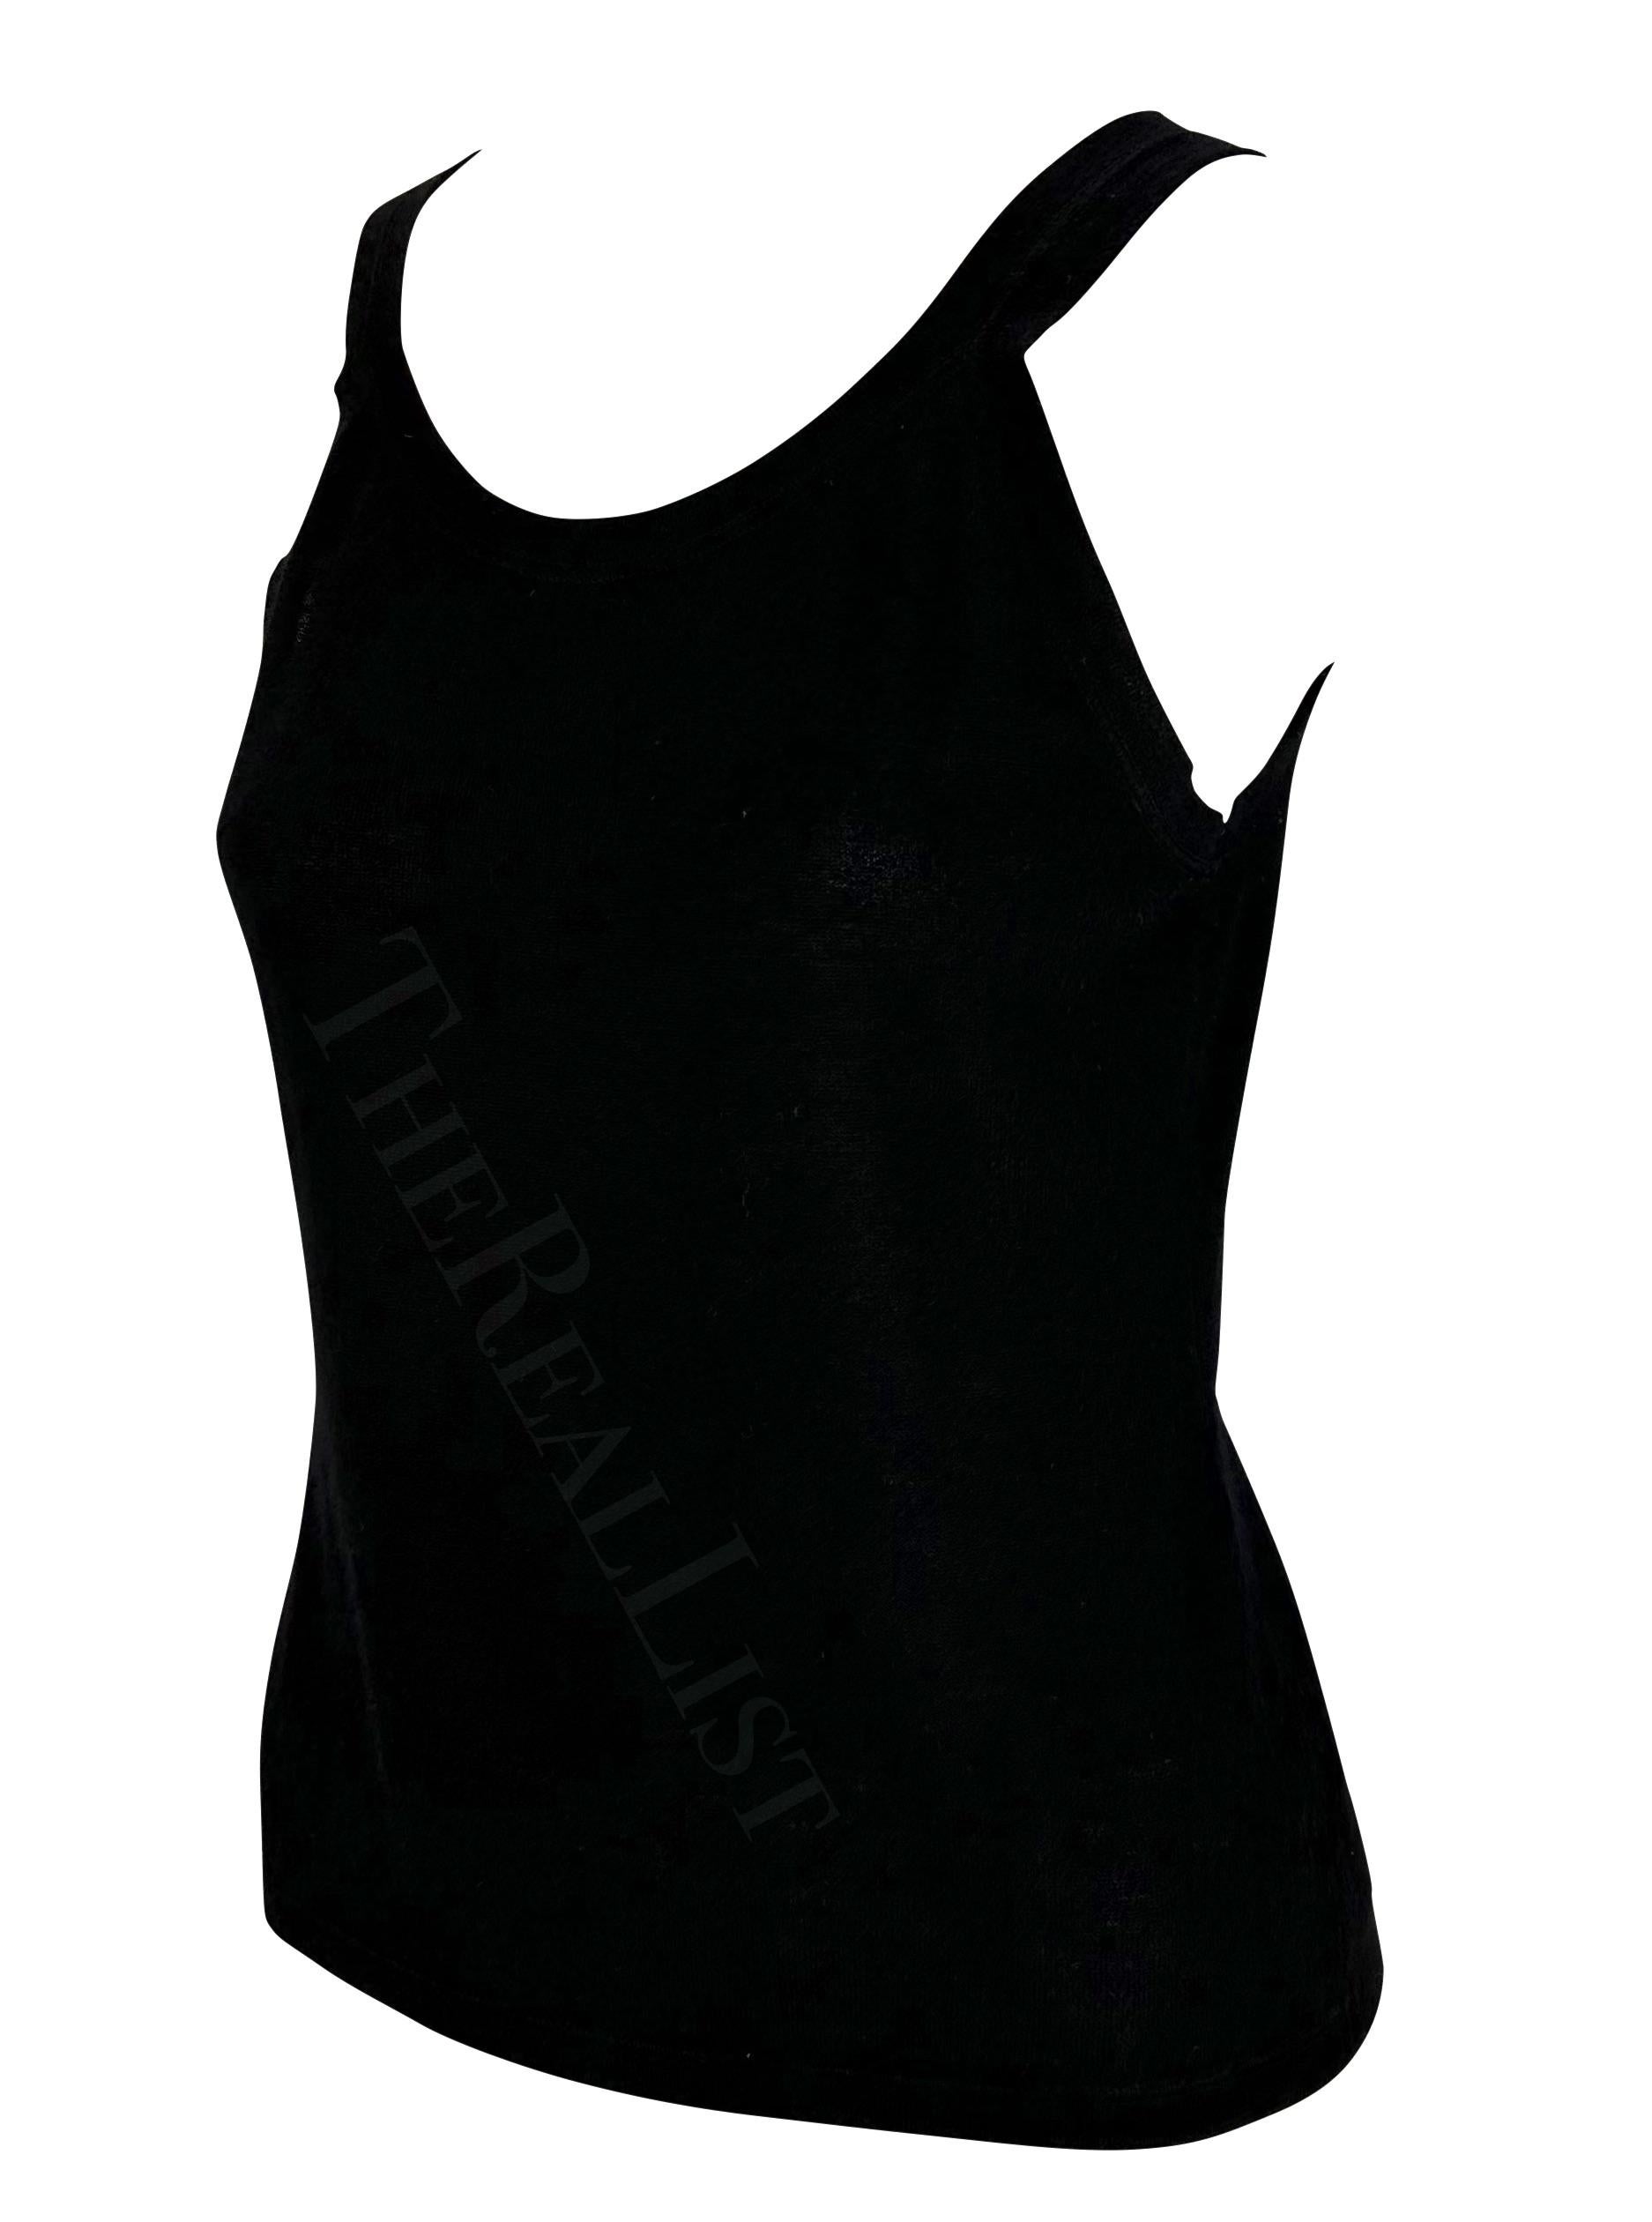 F/W 1997 Gucci by Tom Ford Runway Cashmere Black Stretch Tank Top  In Excellent Condition For Sale In West Hollywood, CA